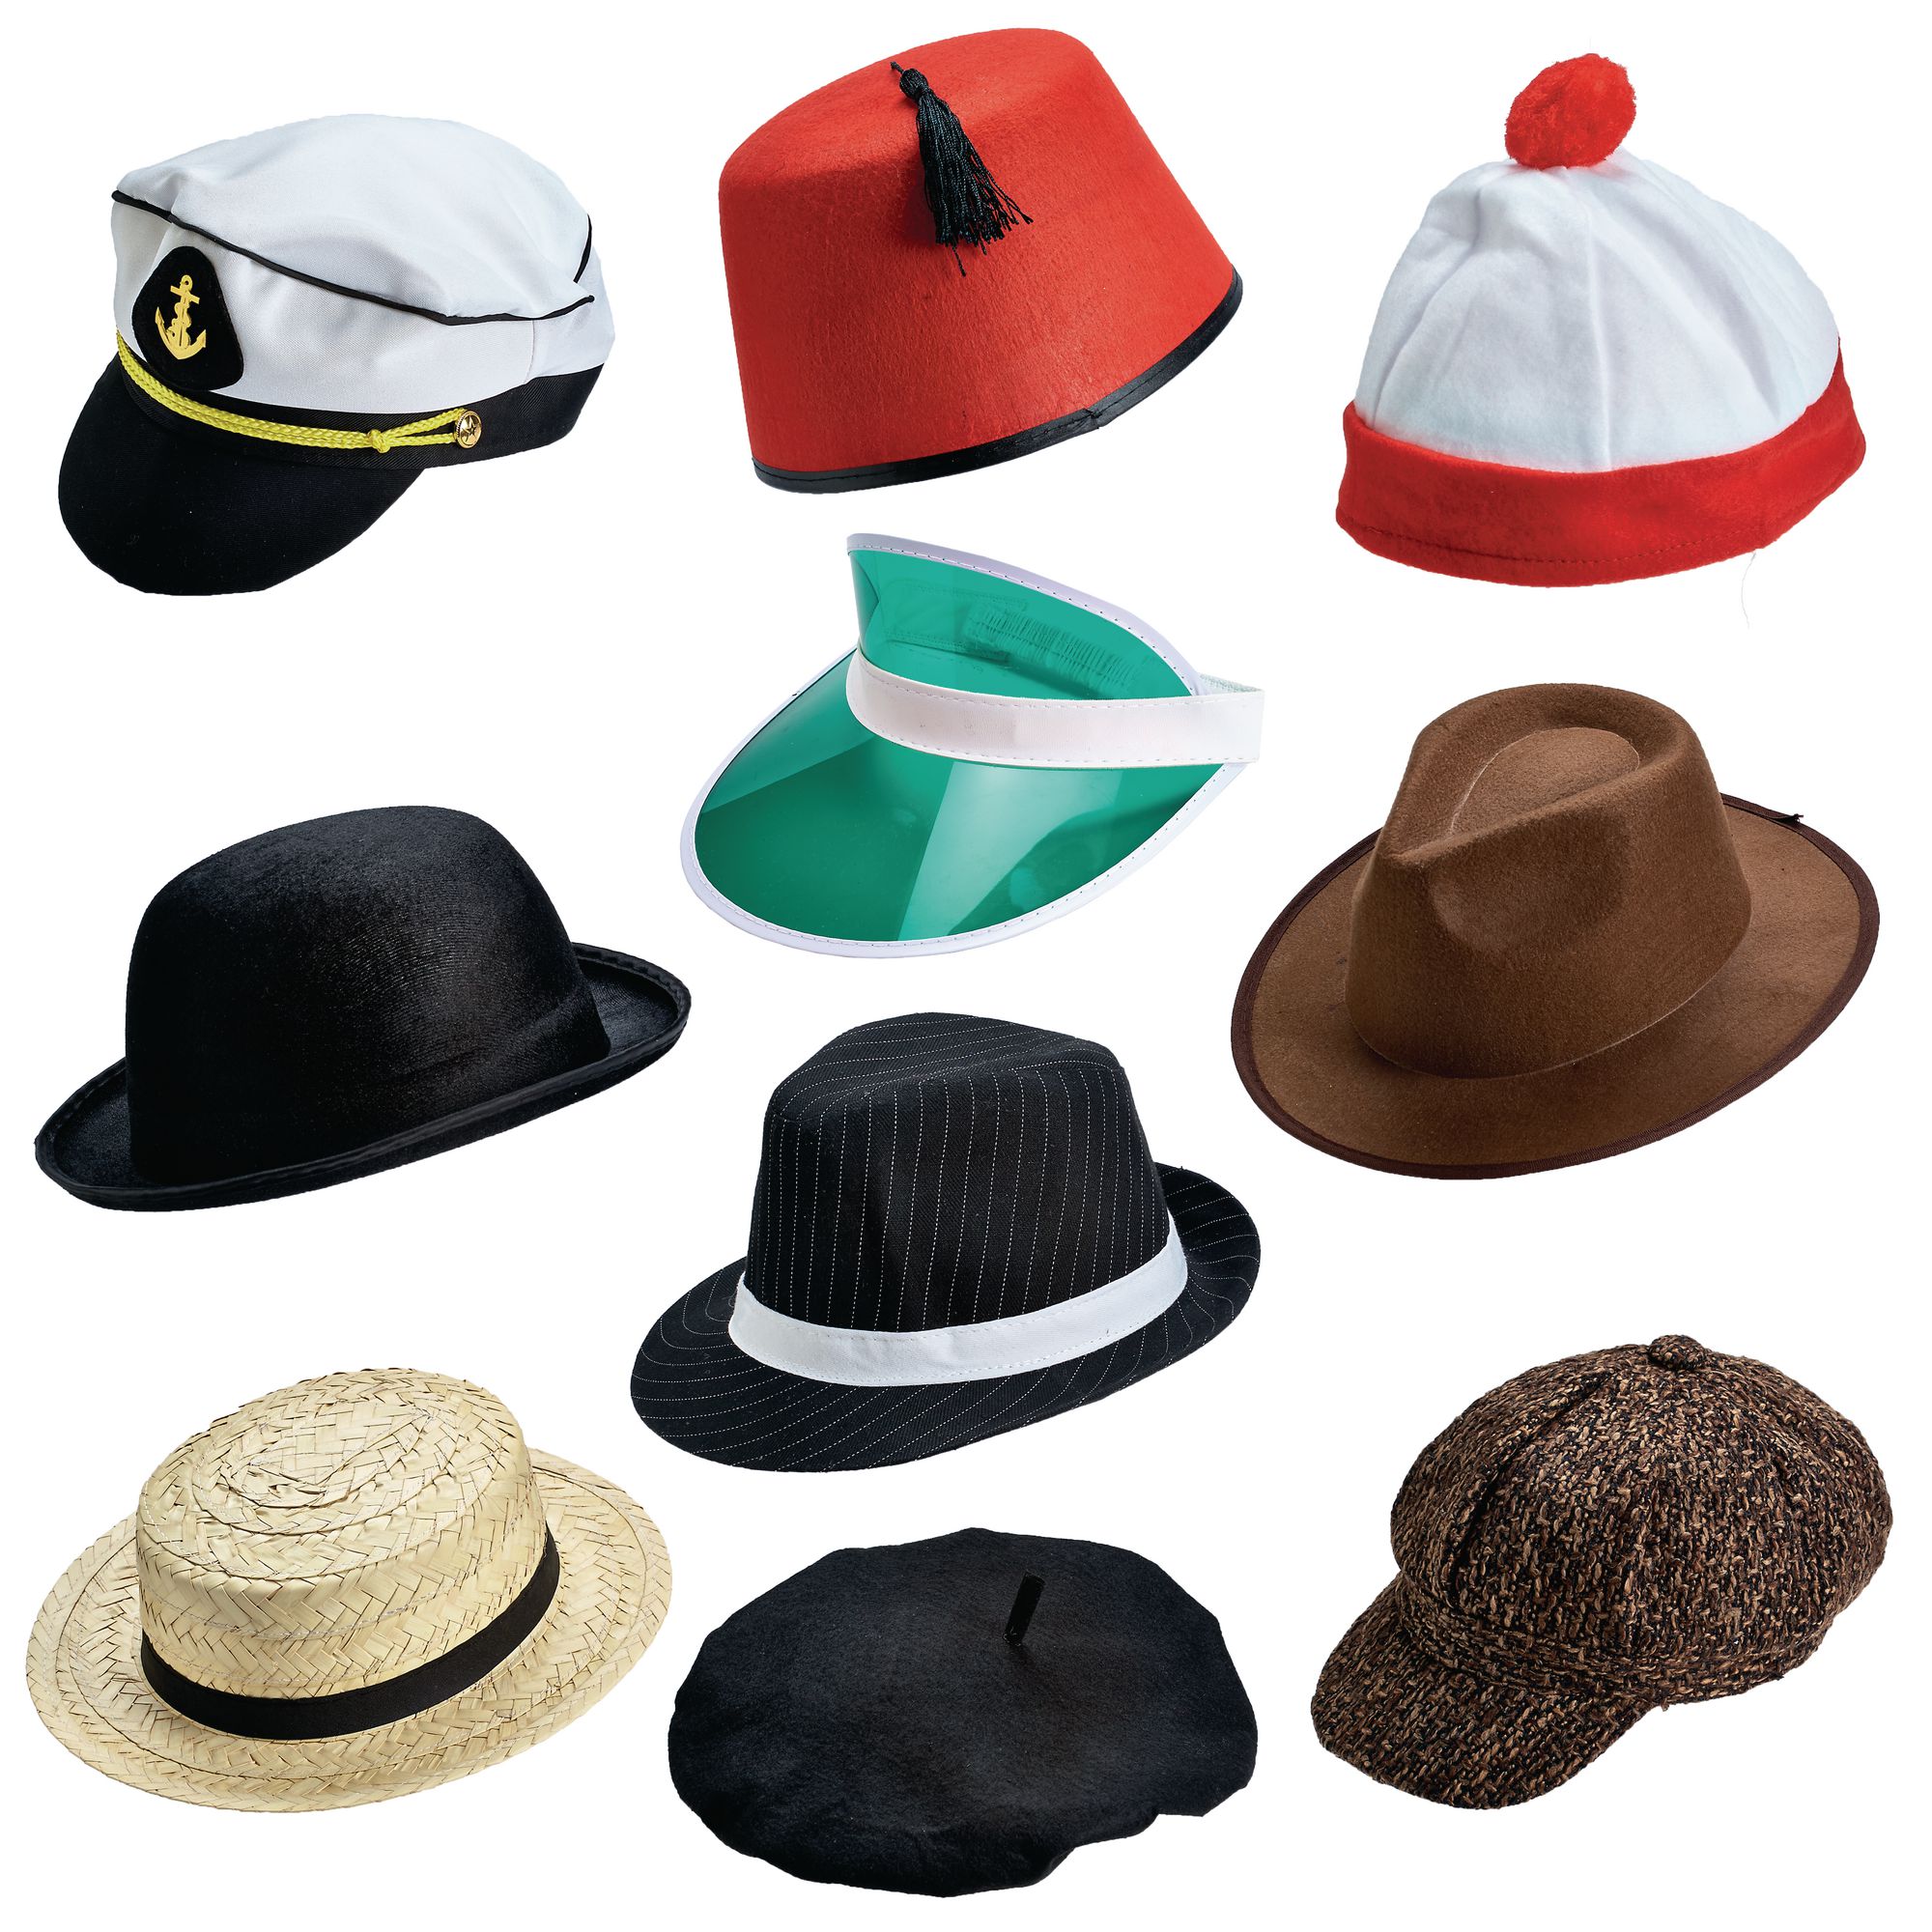 Fun Hats and Accessories - HE1497324 | Hope Education